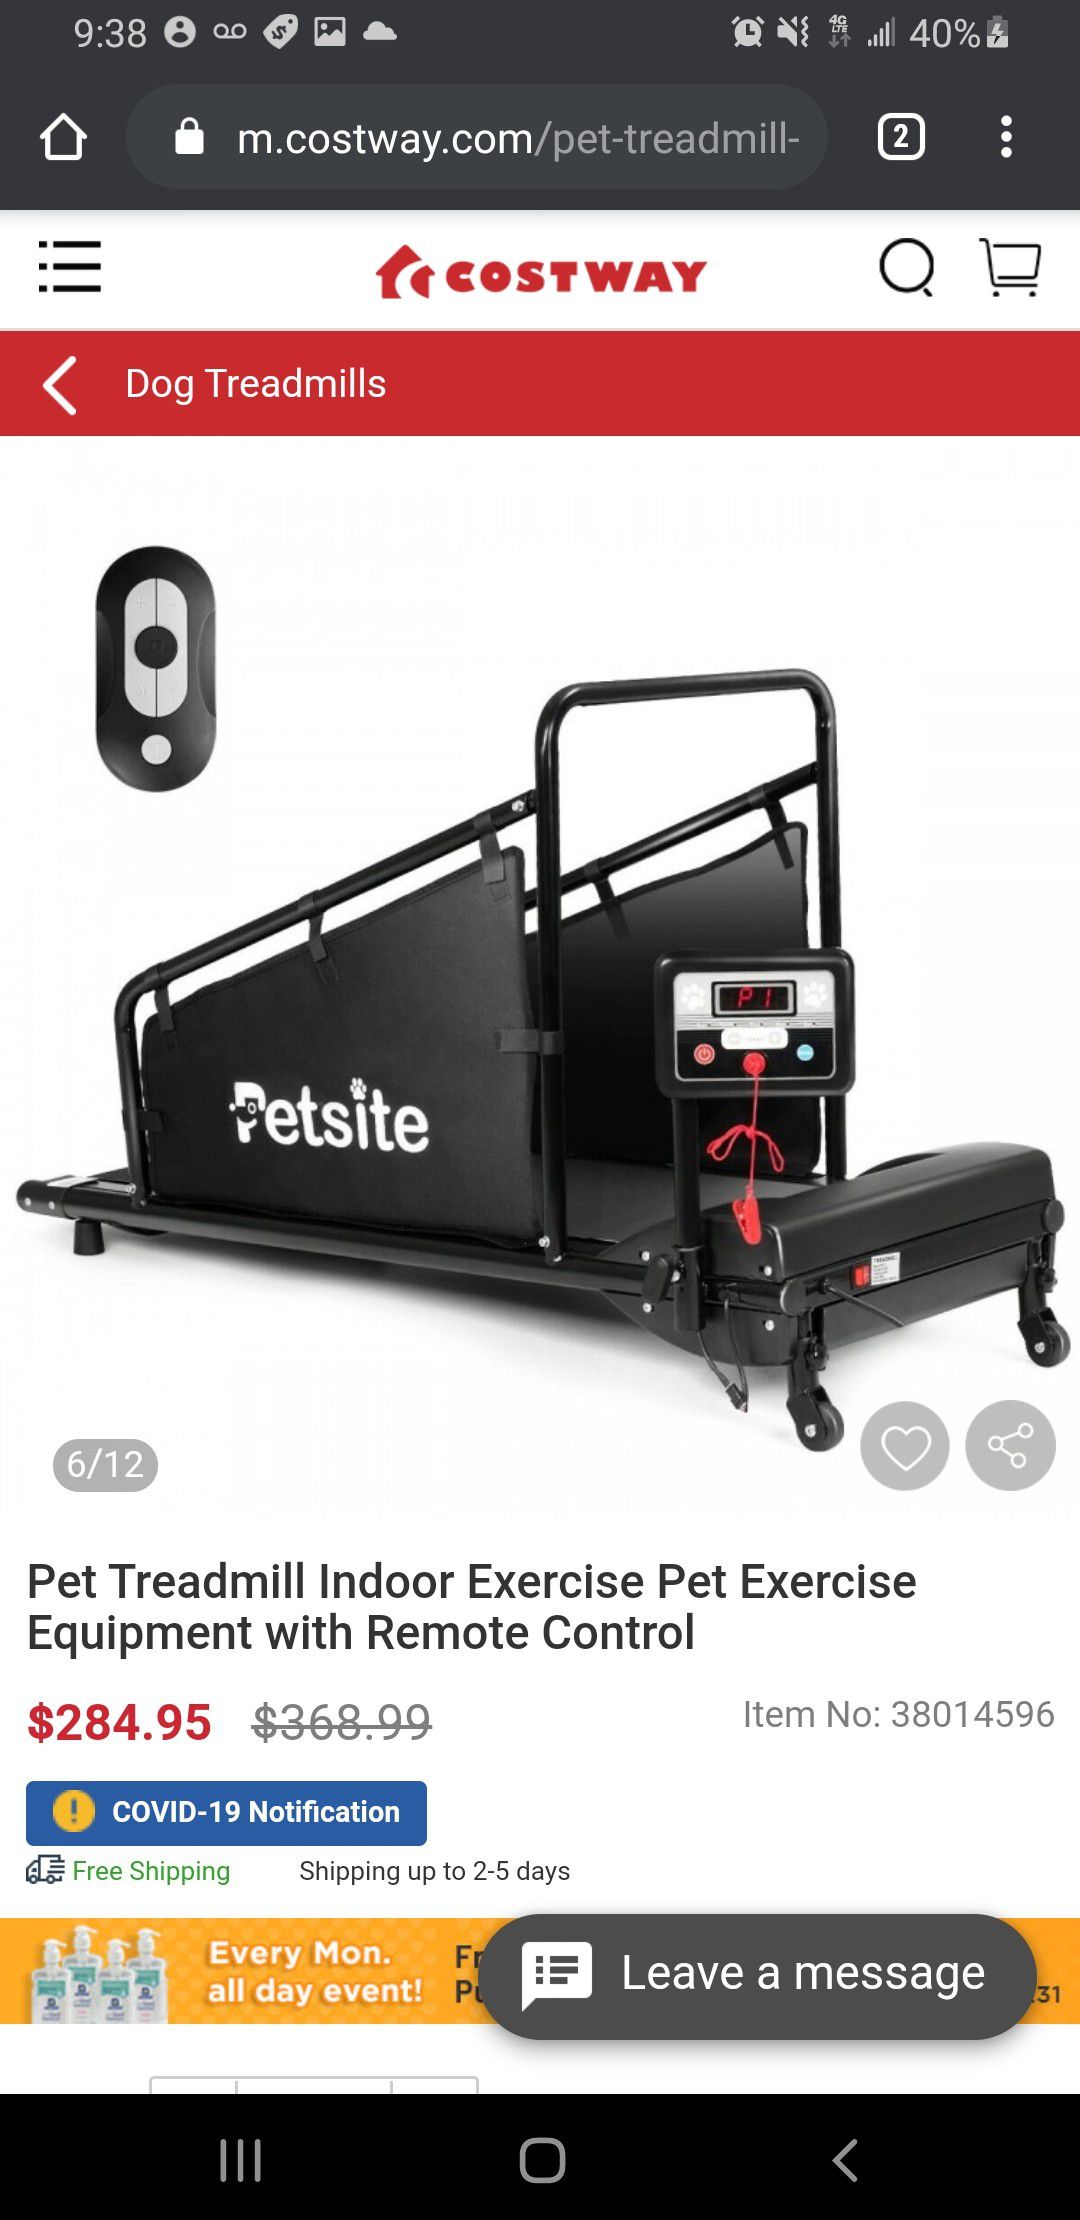 Pet Treadmill Indoor Exercise Pet Exercise Equipment with Remote